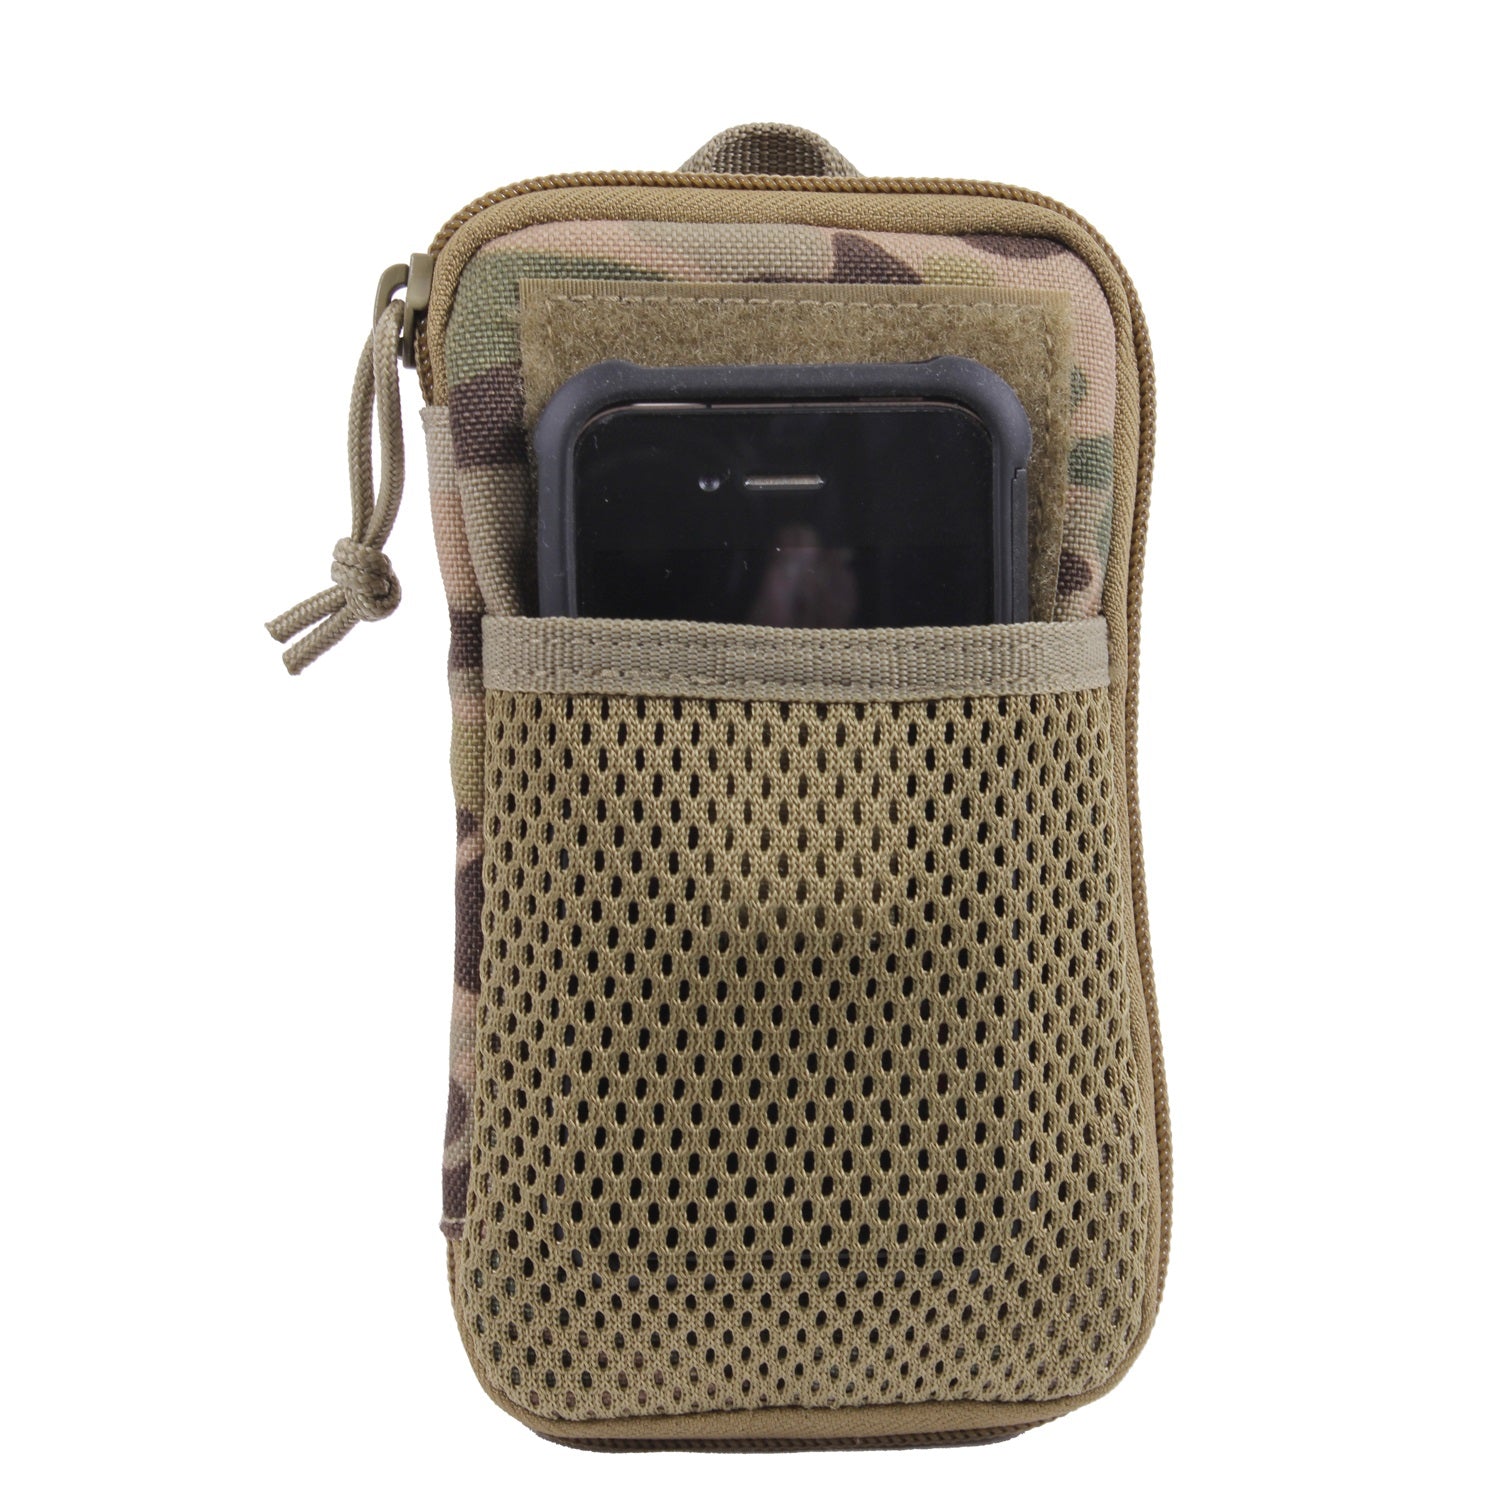 Rothco Tactical MOLLE EDC Wallet and Phone Pouch Multicam